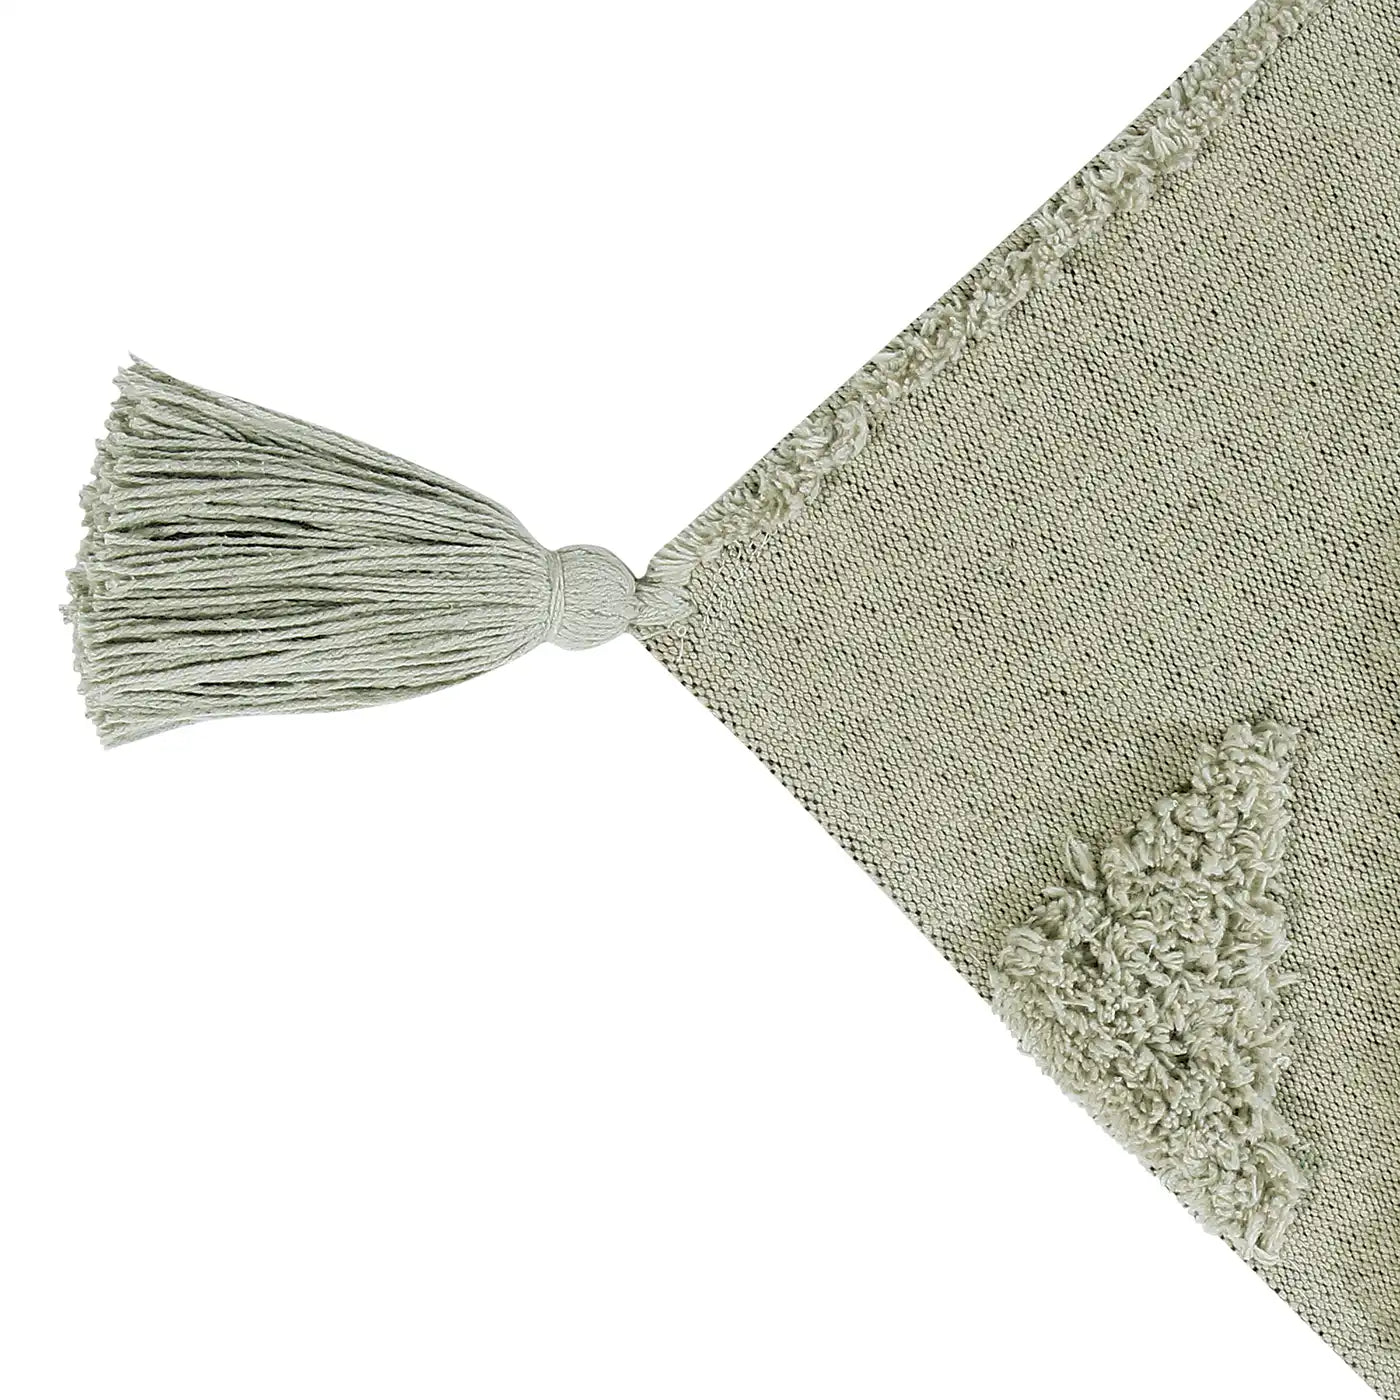 Lorena Canals Tribu Washable Rug - Olive (Re Edition + Canvas Collection)